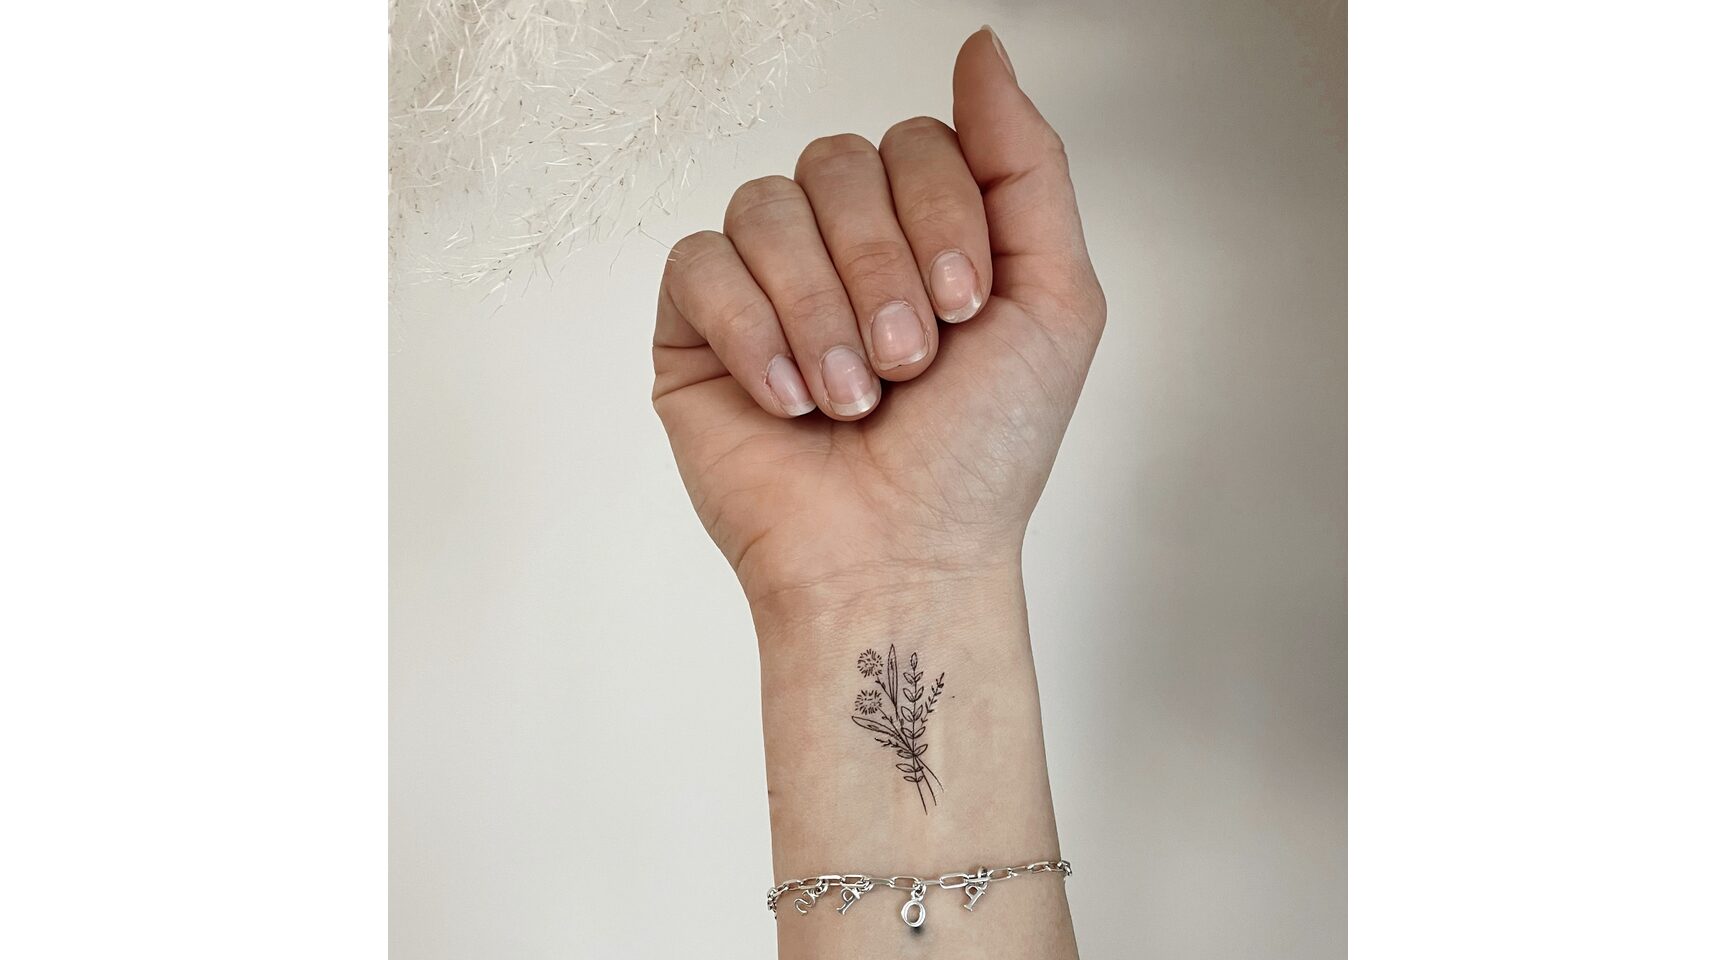 Best matching tattoos for friends and their meaning